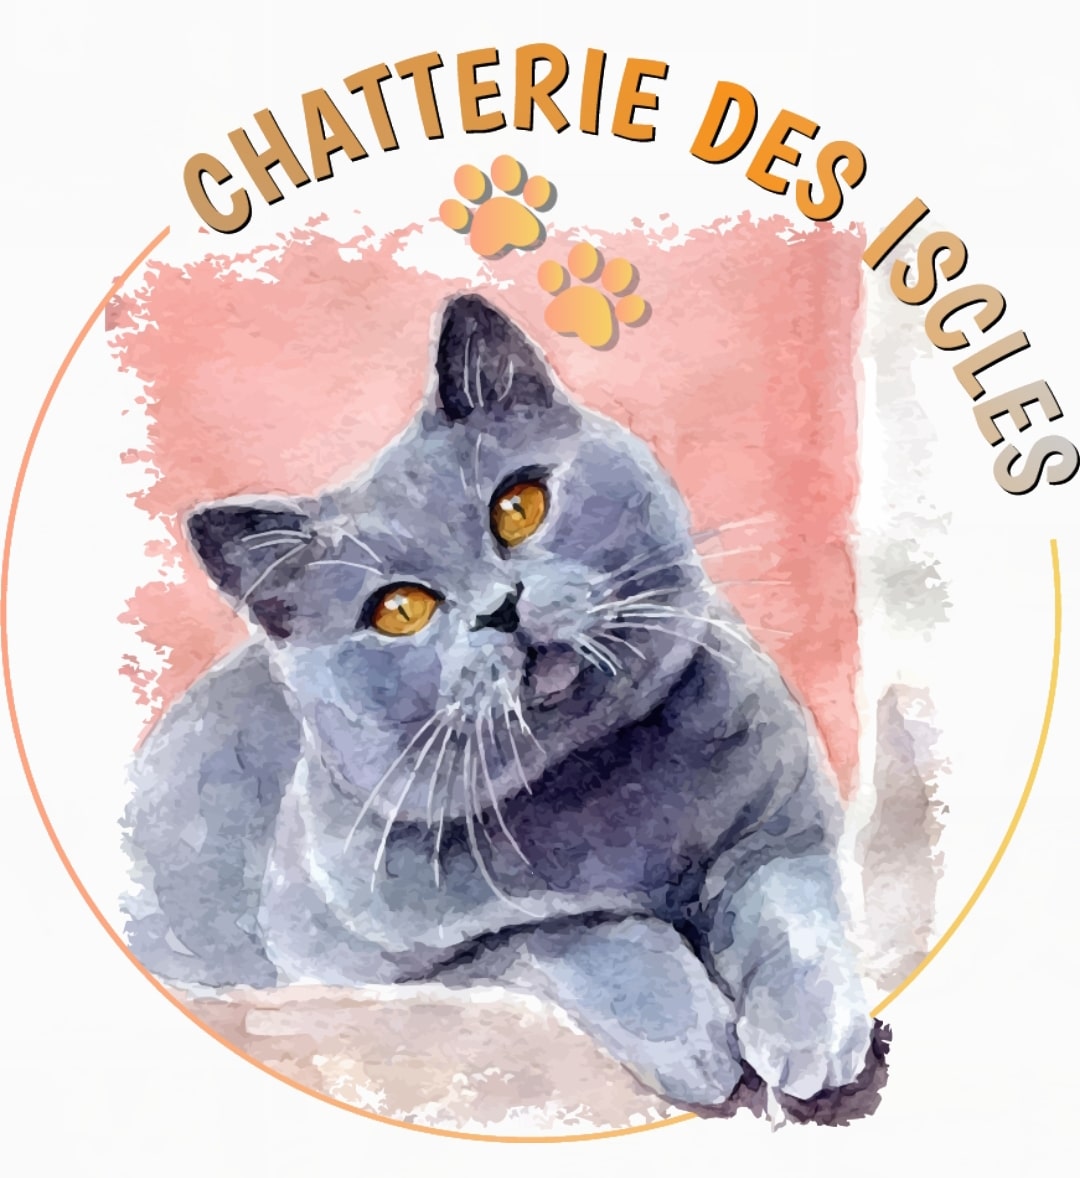 chatterie des iscles